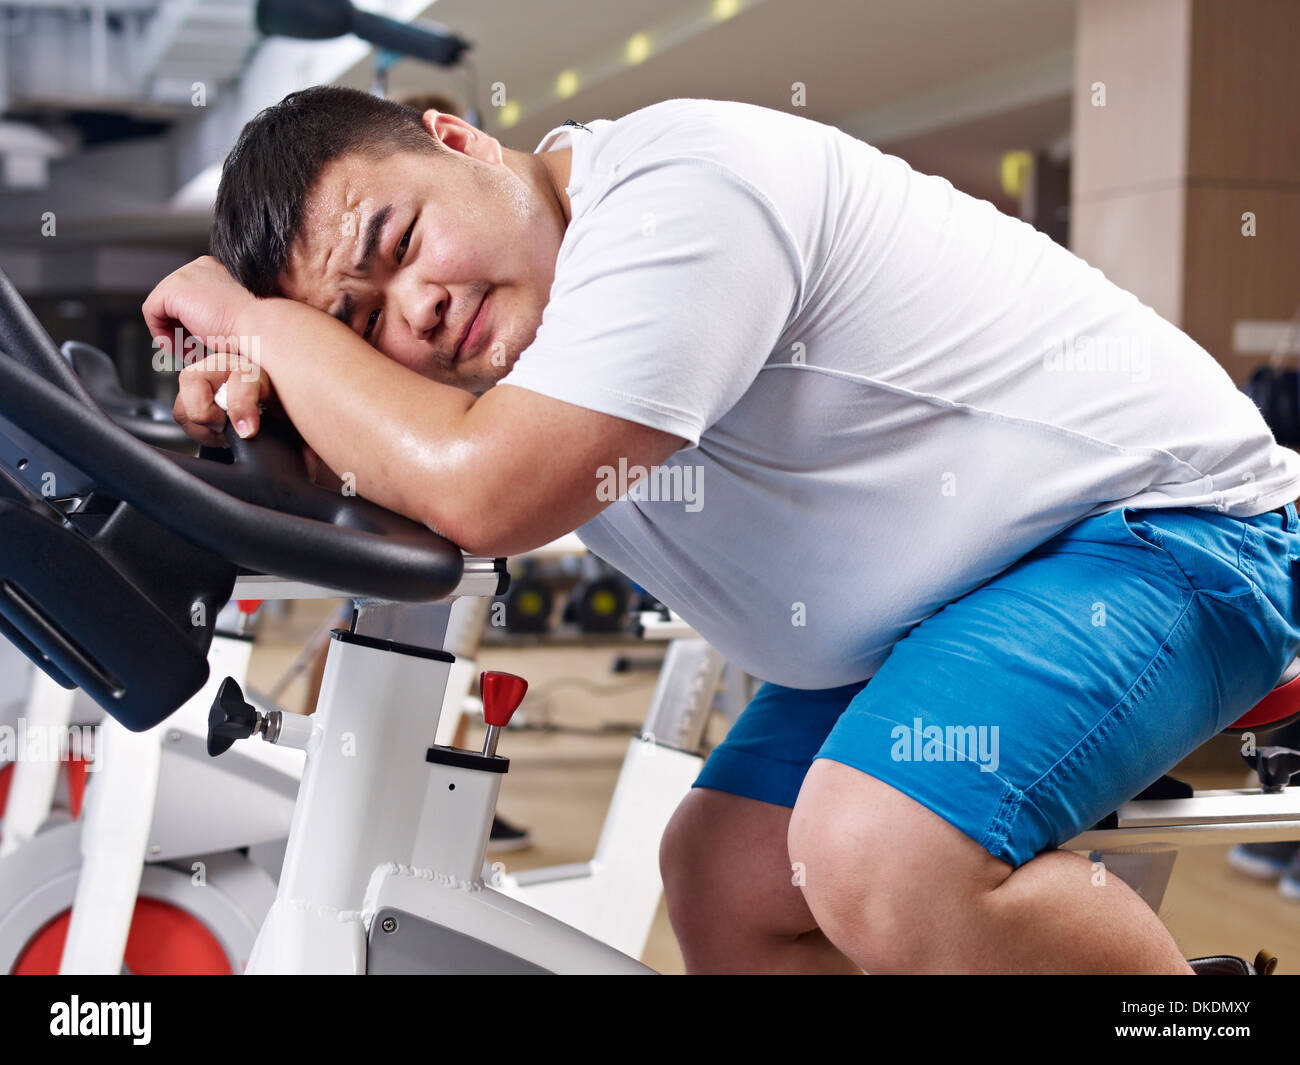 overweight-young-man-working-out-in-gym-DKDMXY.jpg